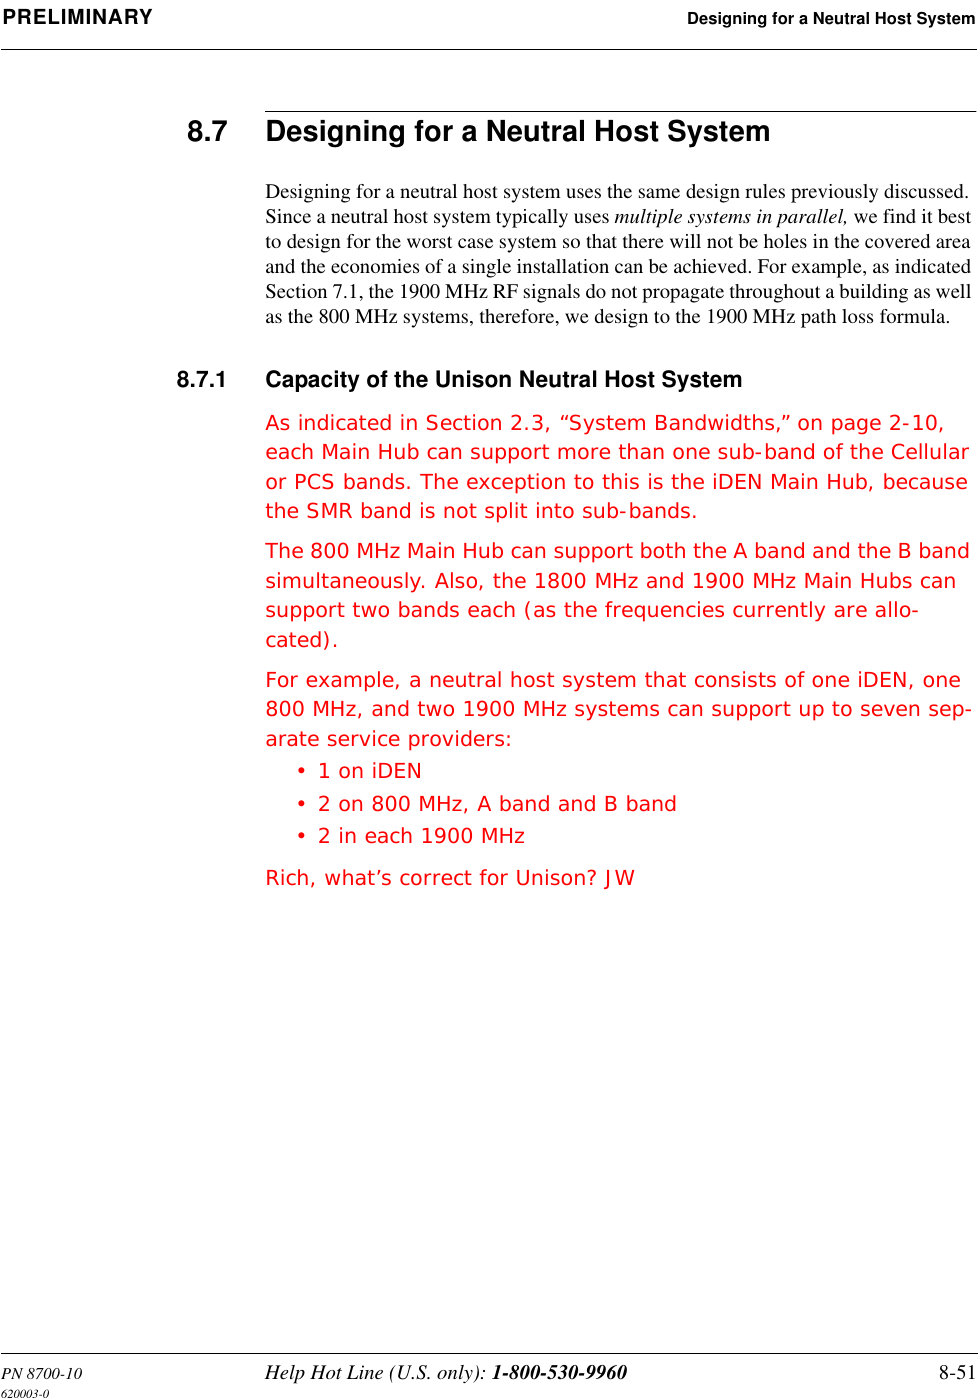 PN 8700-10 Help Hot Line (U.S. only): 1-800-530-9960 8-51620003-0PRELIMINARY Designing for a Neutral Host System8.7 Designing for a Neutral Host SystemDesigning for a neutral host system uses the same design rules previously discussed. Since a neutral host system typically uses multiple systems in parallel, we find it best to design for the worst case system so that there will not be holes in the covered area and the economies of a single installation can be achieved. For example, as indicated Section 7.1, the 1900 MHz RF signals do not propagate throughout a building as well as the 800 MHz systems, therefore, we design to the 1900 MHz path loss formula.8.7.1 Capacity of the Unison Neutral Host SystemAs indicated in Section 2.3, “System Bandwidths,” on page 2-10, each Main Hub can support more than one sub-band of the Cellular or PCS bands. The exception to this is the iDEN Main Hub, because the SMR band is not split into sub-bands.The 800 MHz Main Hub can support both the A band and the B band simultaneously. Also, the 1800 MHz and 1900 MHz Main Hubs can support two bands each (as the frequencies currently are allo-cated).For example, a neutral host system that consists of one iDEN, one 800 MHz, and two 1900 MHz systems can support up to seven sep-arate service providers:•1 on iDEN• 2 on 800 MHz, A band and B band• 2 in each 1900 MHzRich, what’s correct for Unison? JW